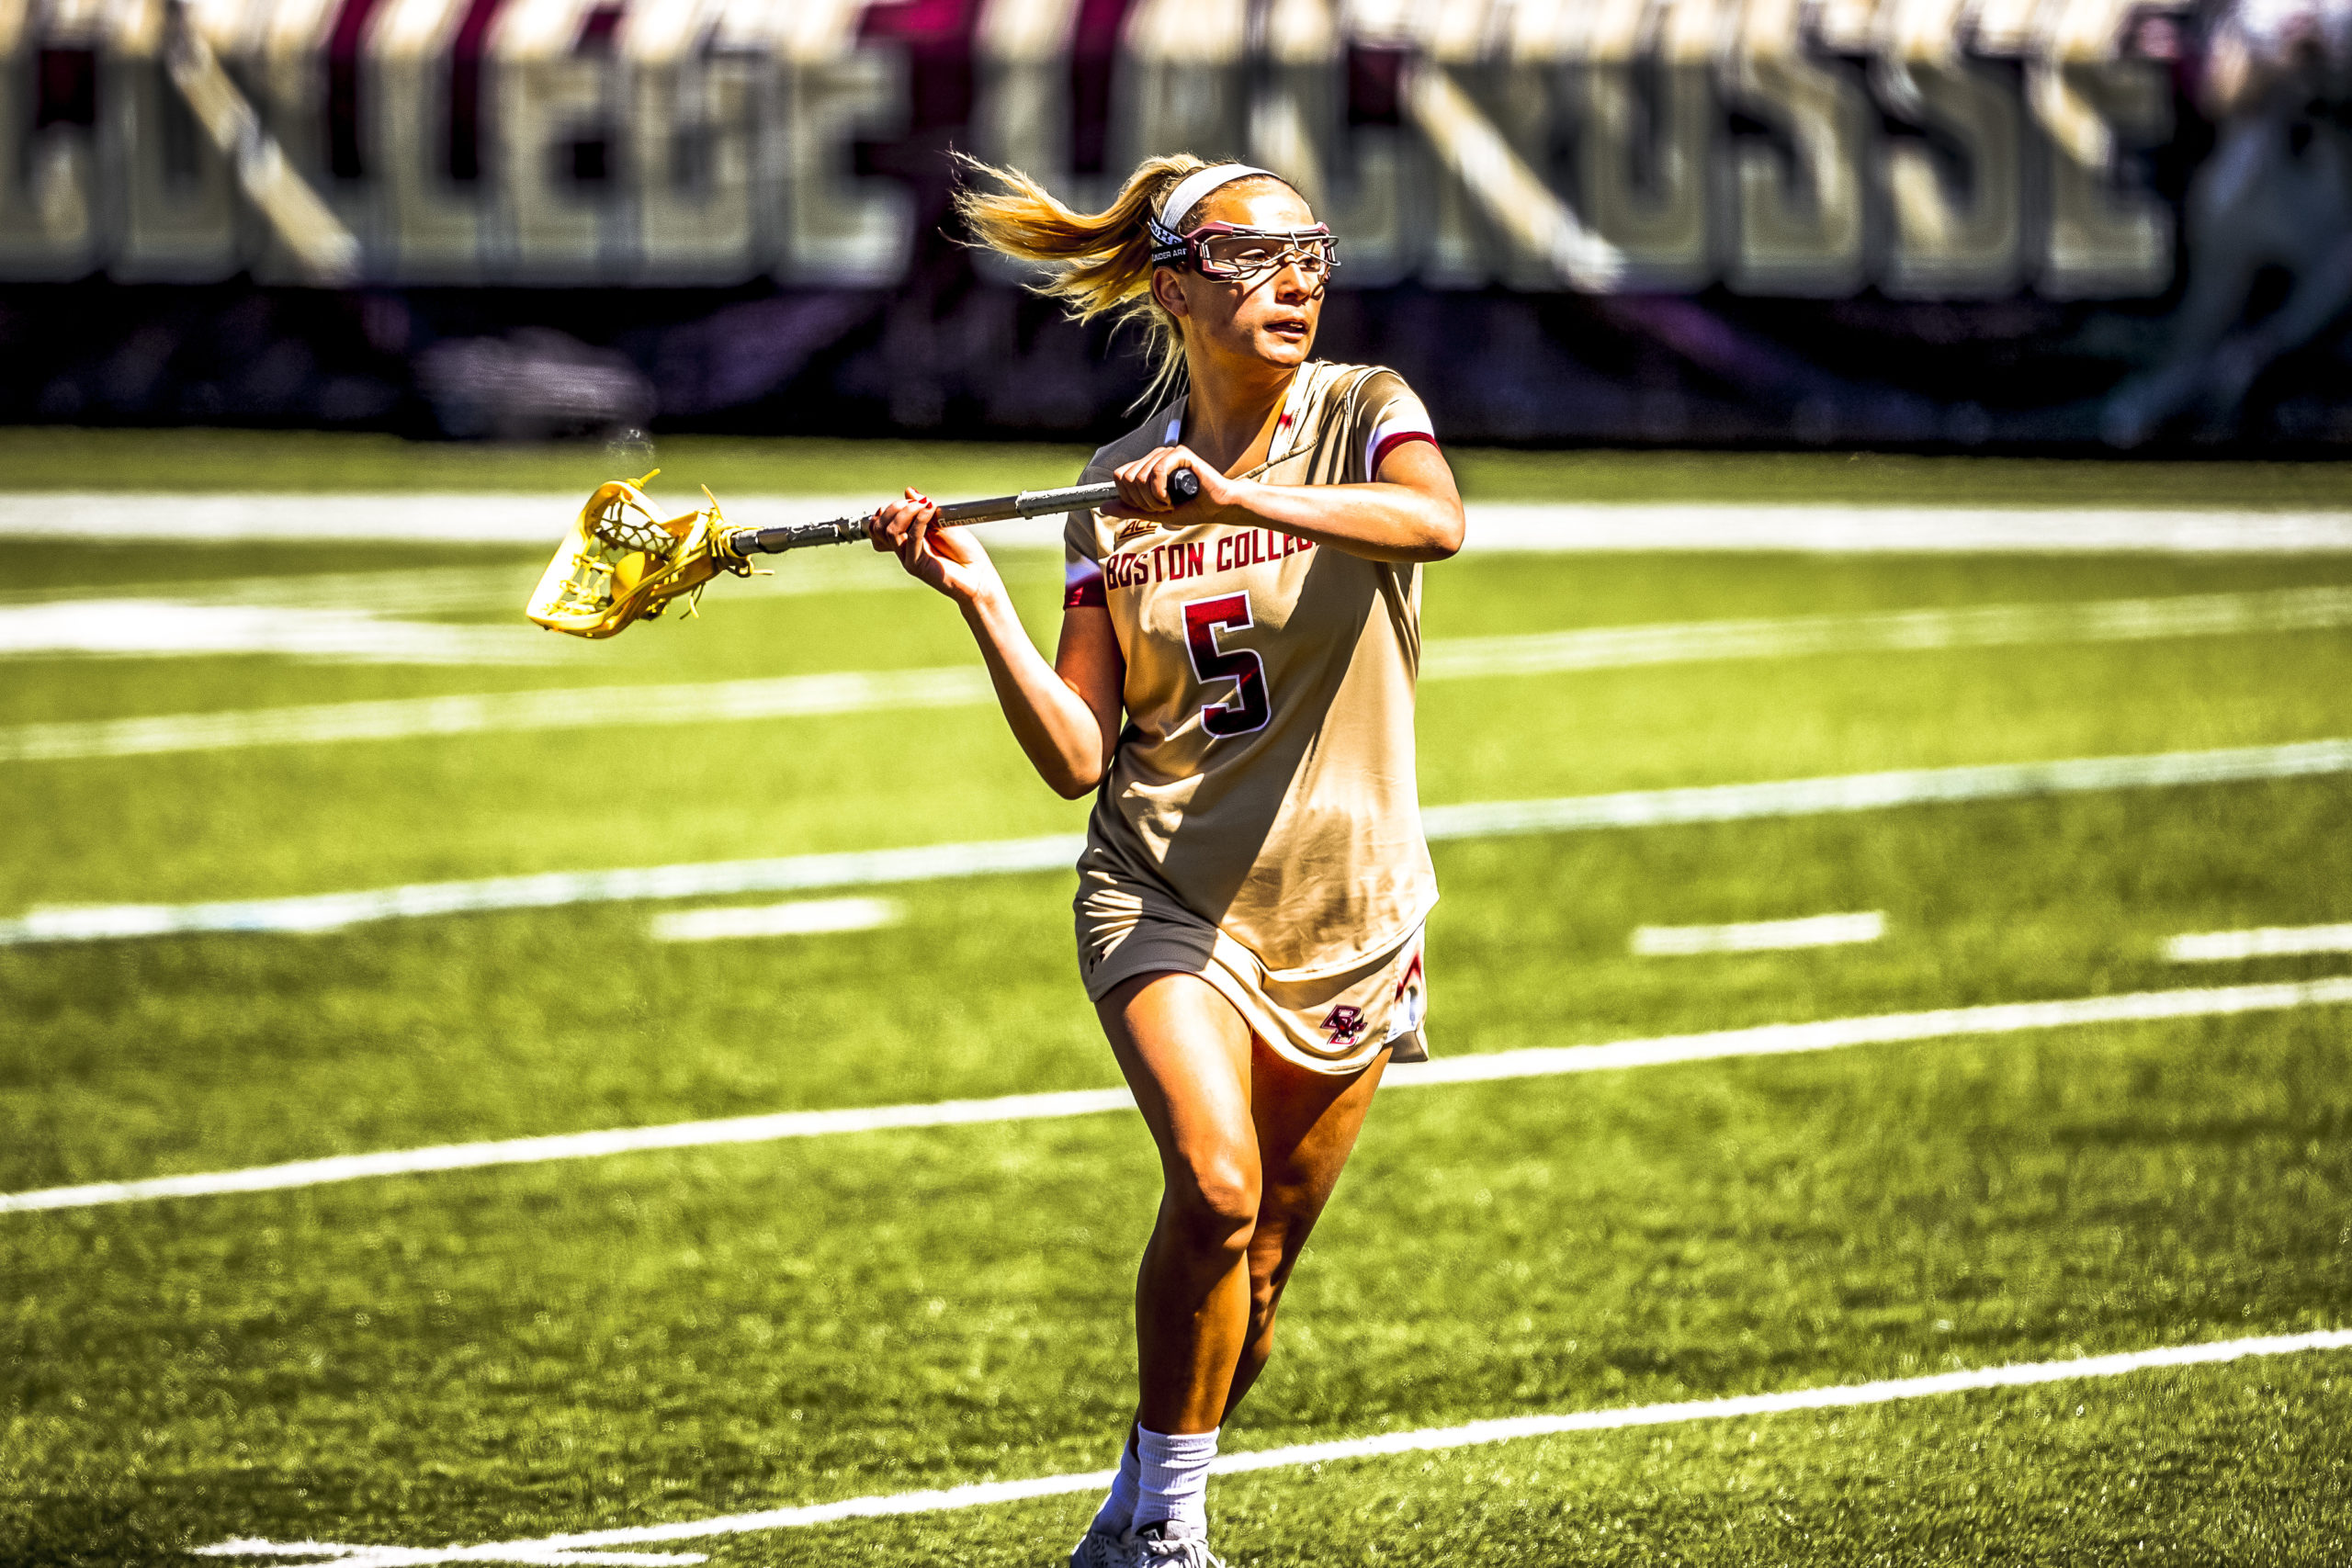 Westhampton Beach graduate Isabelle Smith earned ACC Freshman of the Year honors in her first season at Boston College.